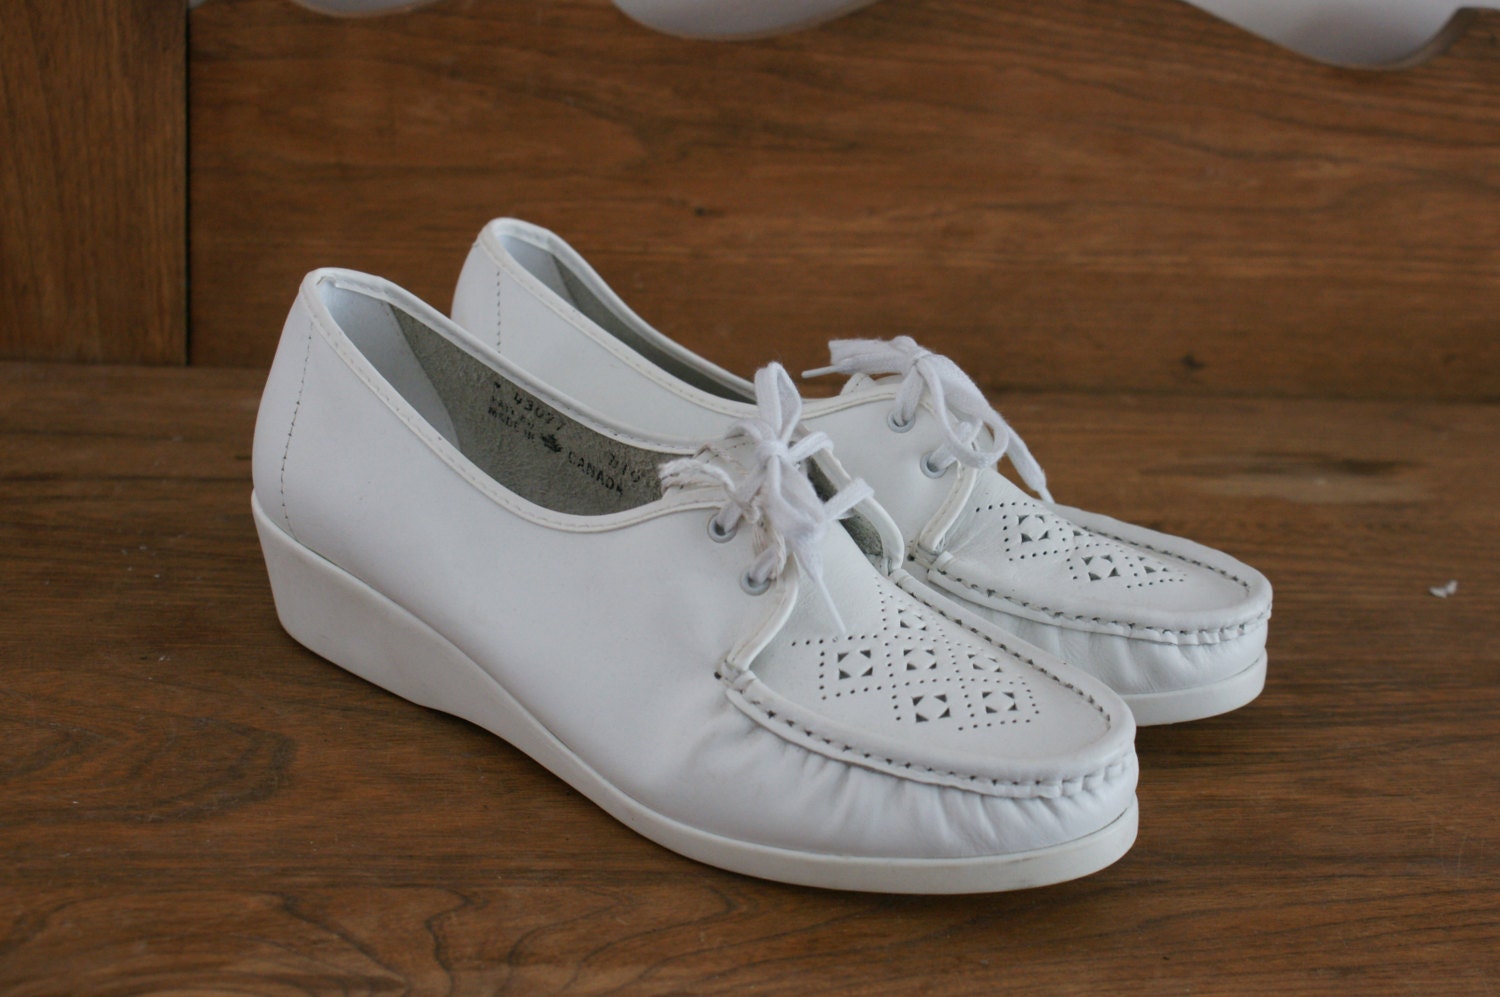 Ladies Vintage White Leather Lace Up Oxford Nurse Shoes by